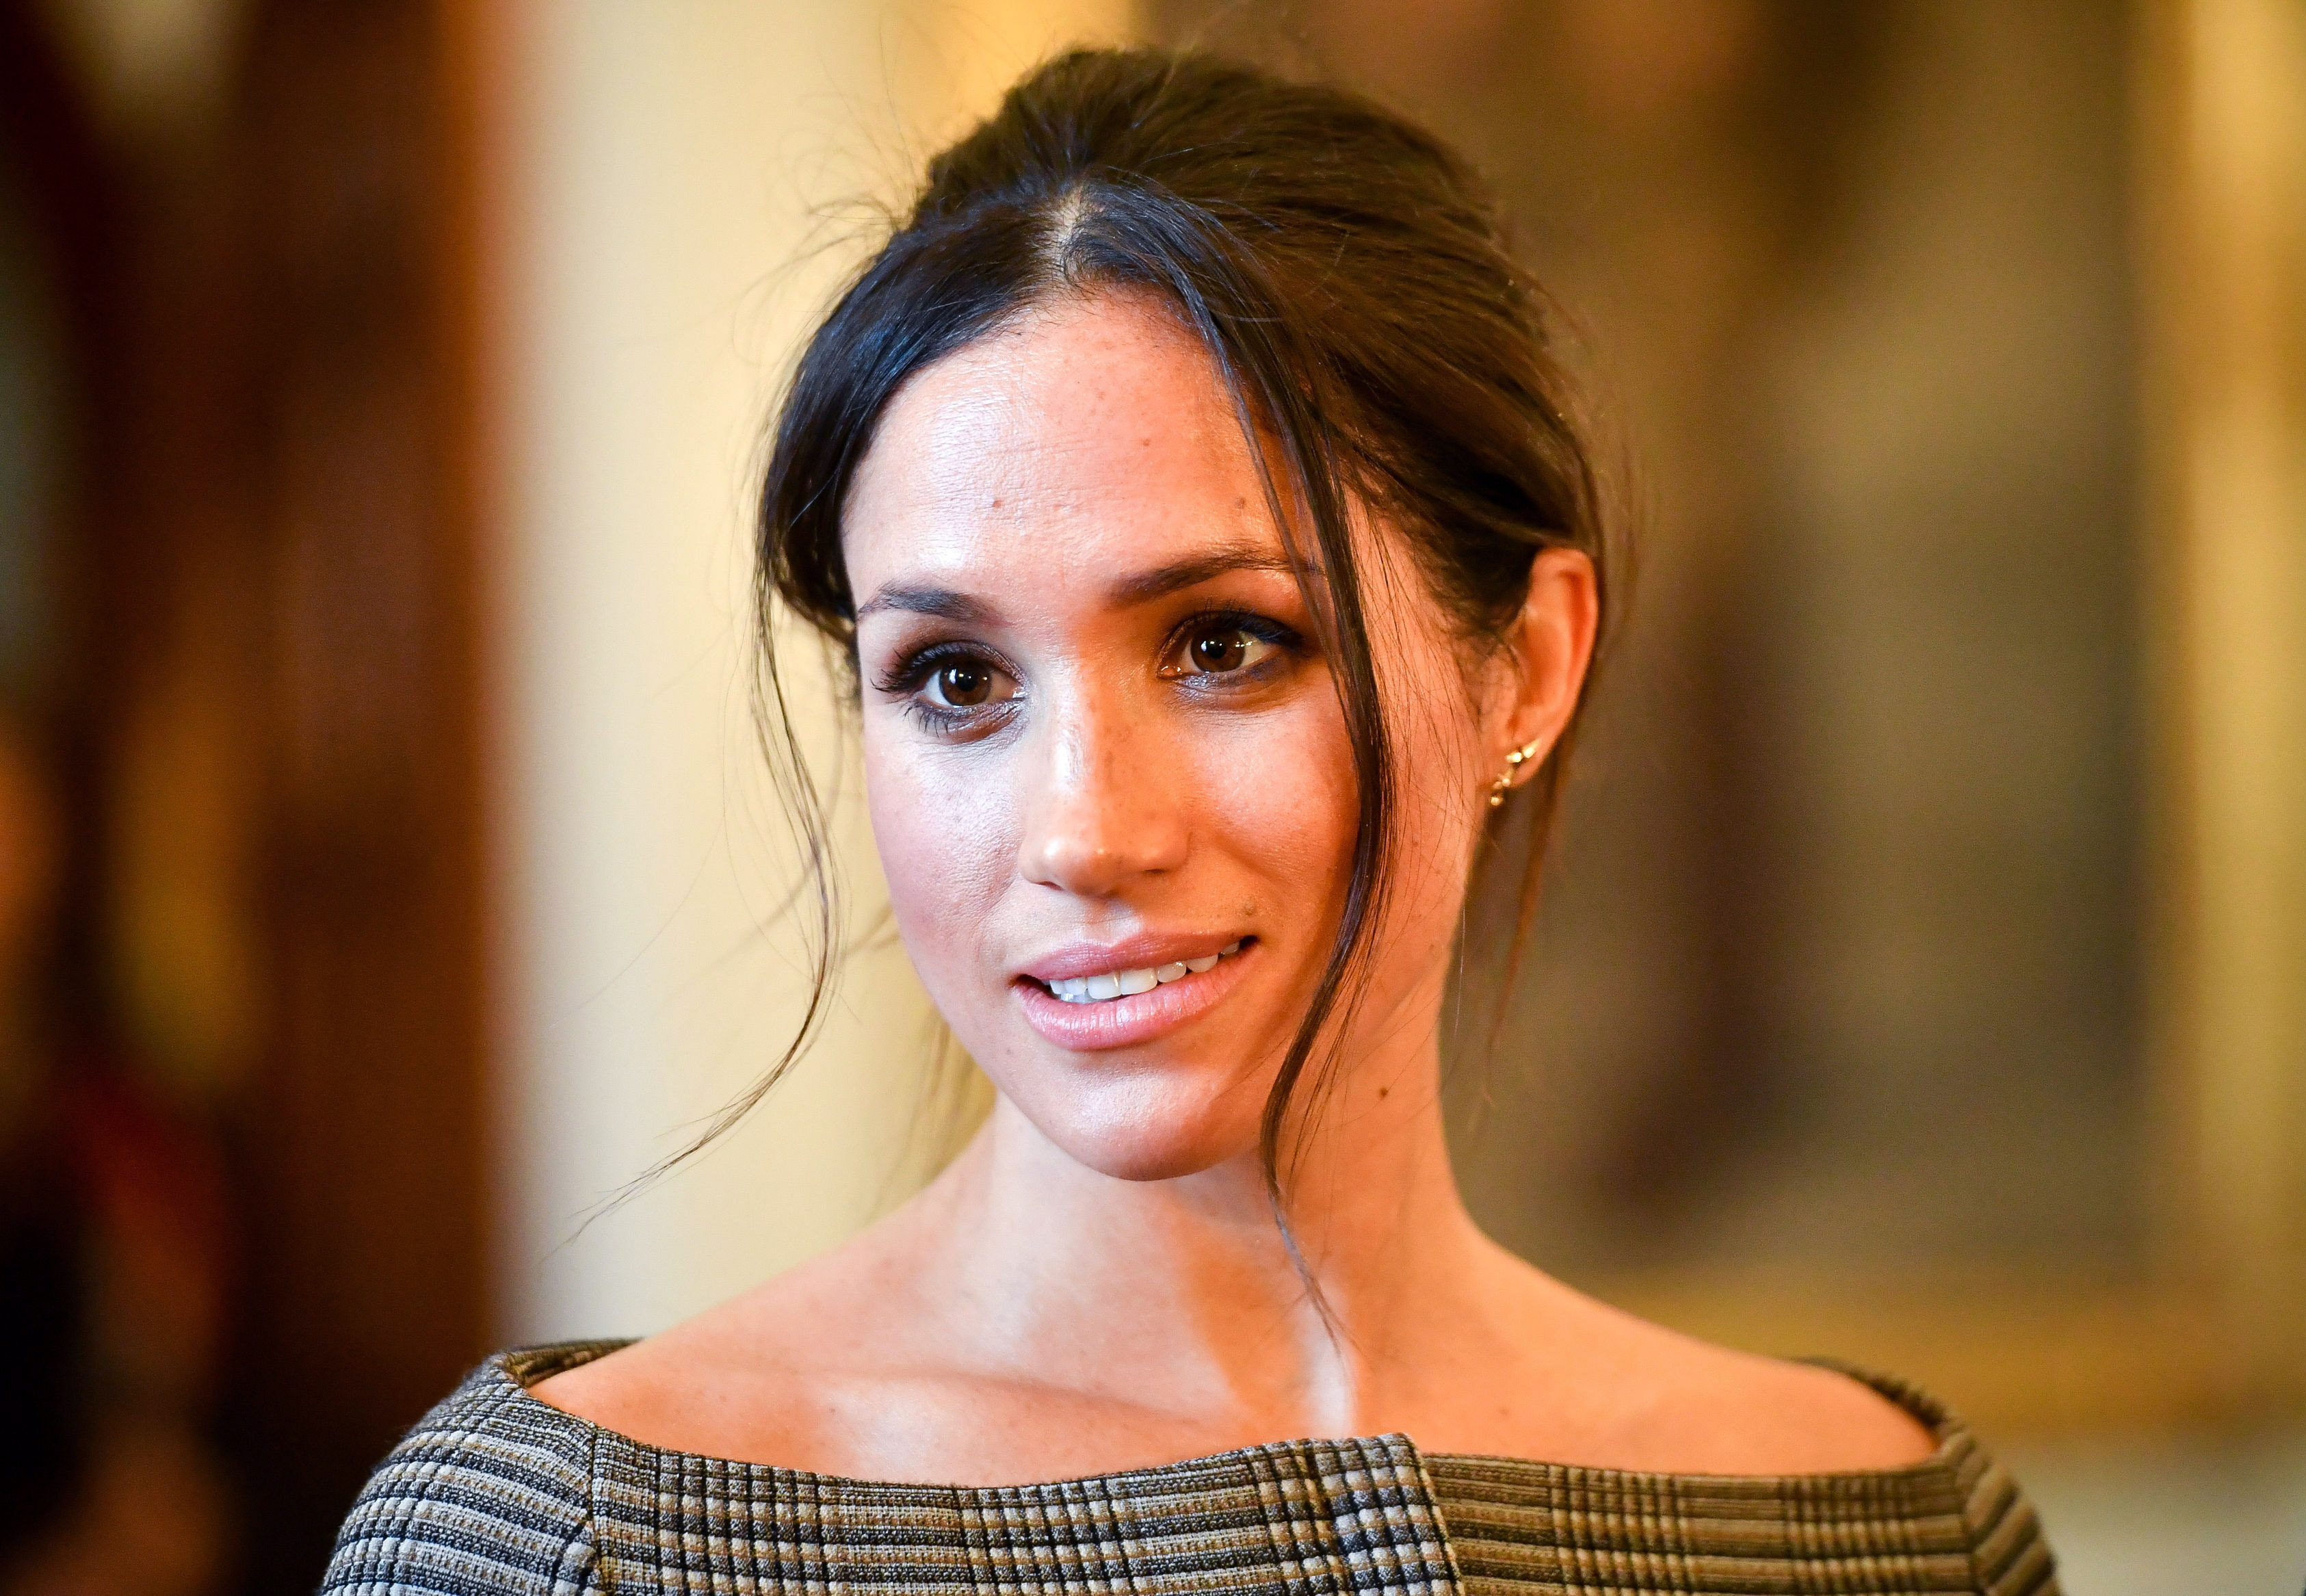 Meghan Markle during her visit to Cardiff Castle in 2018 | Source: Getty Images